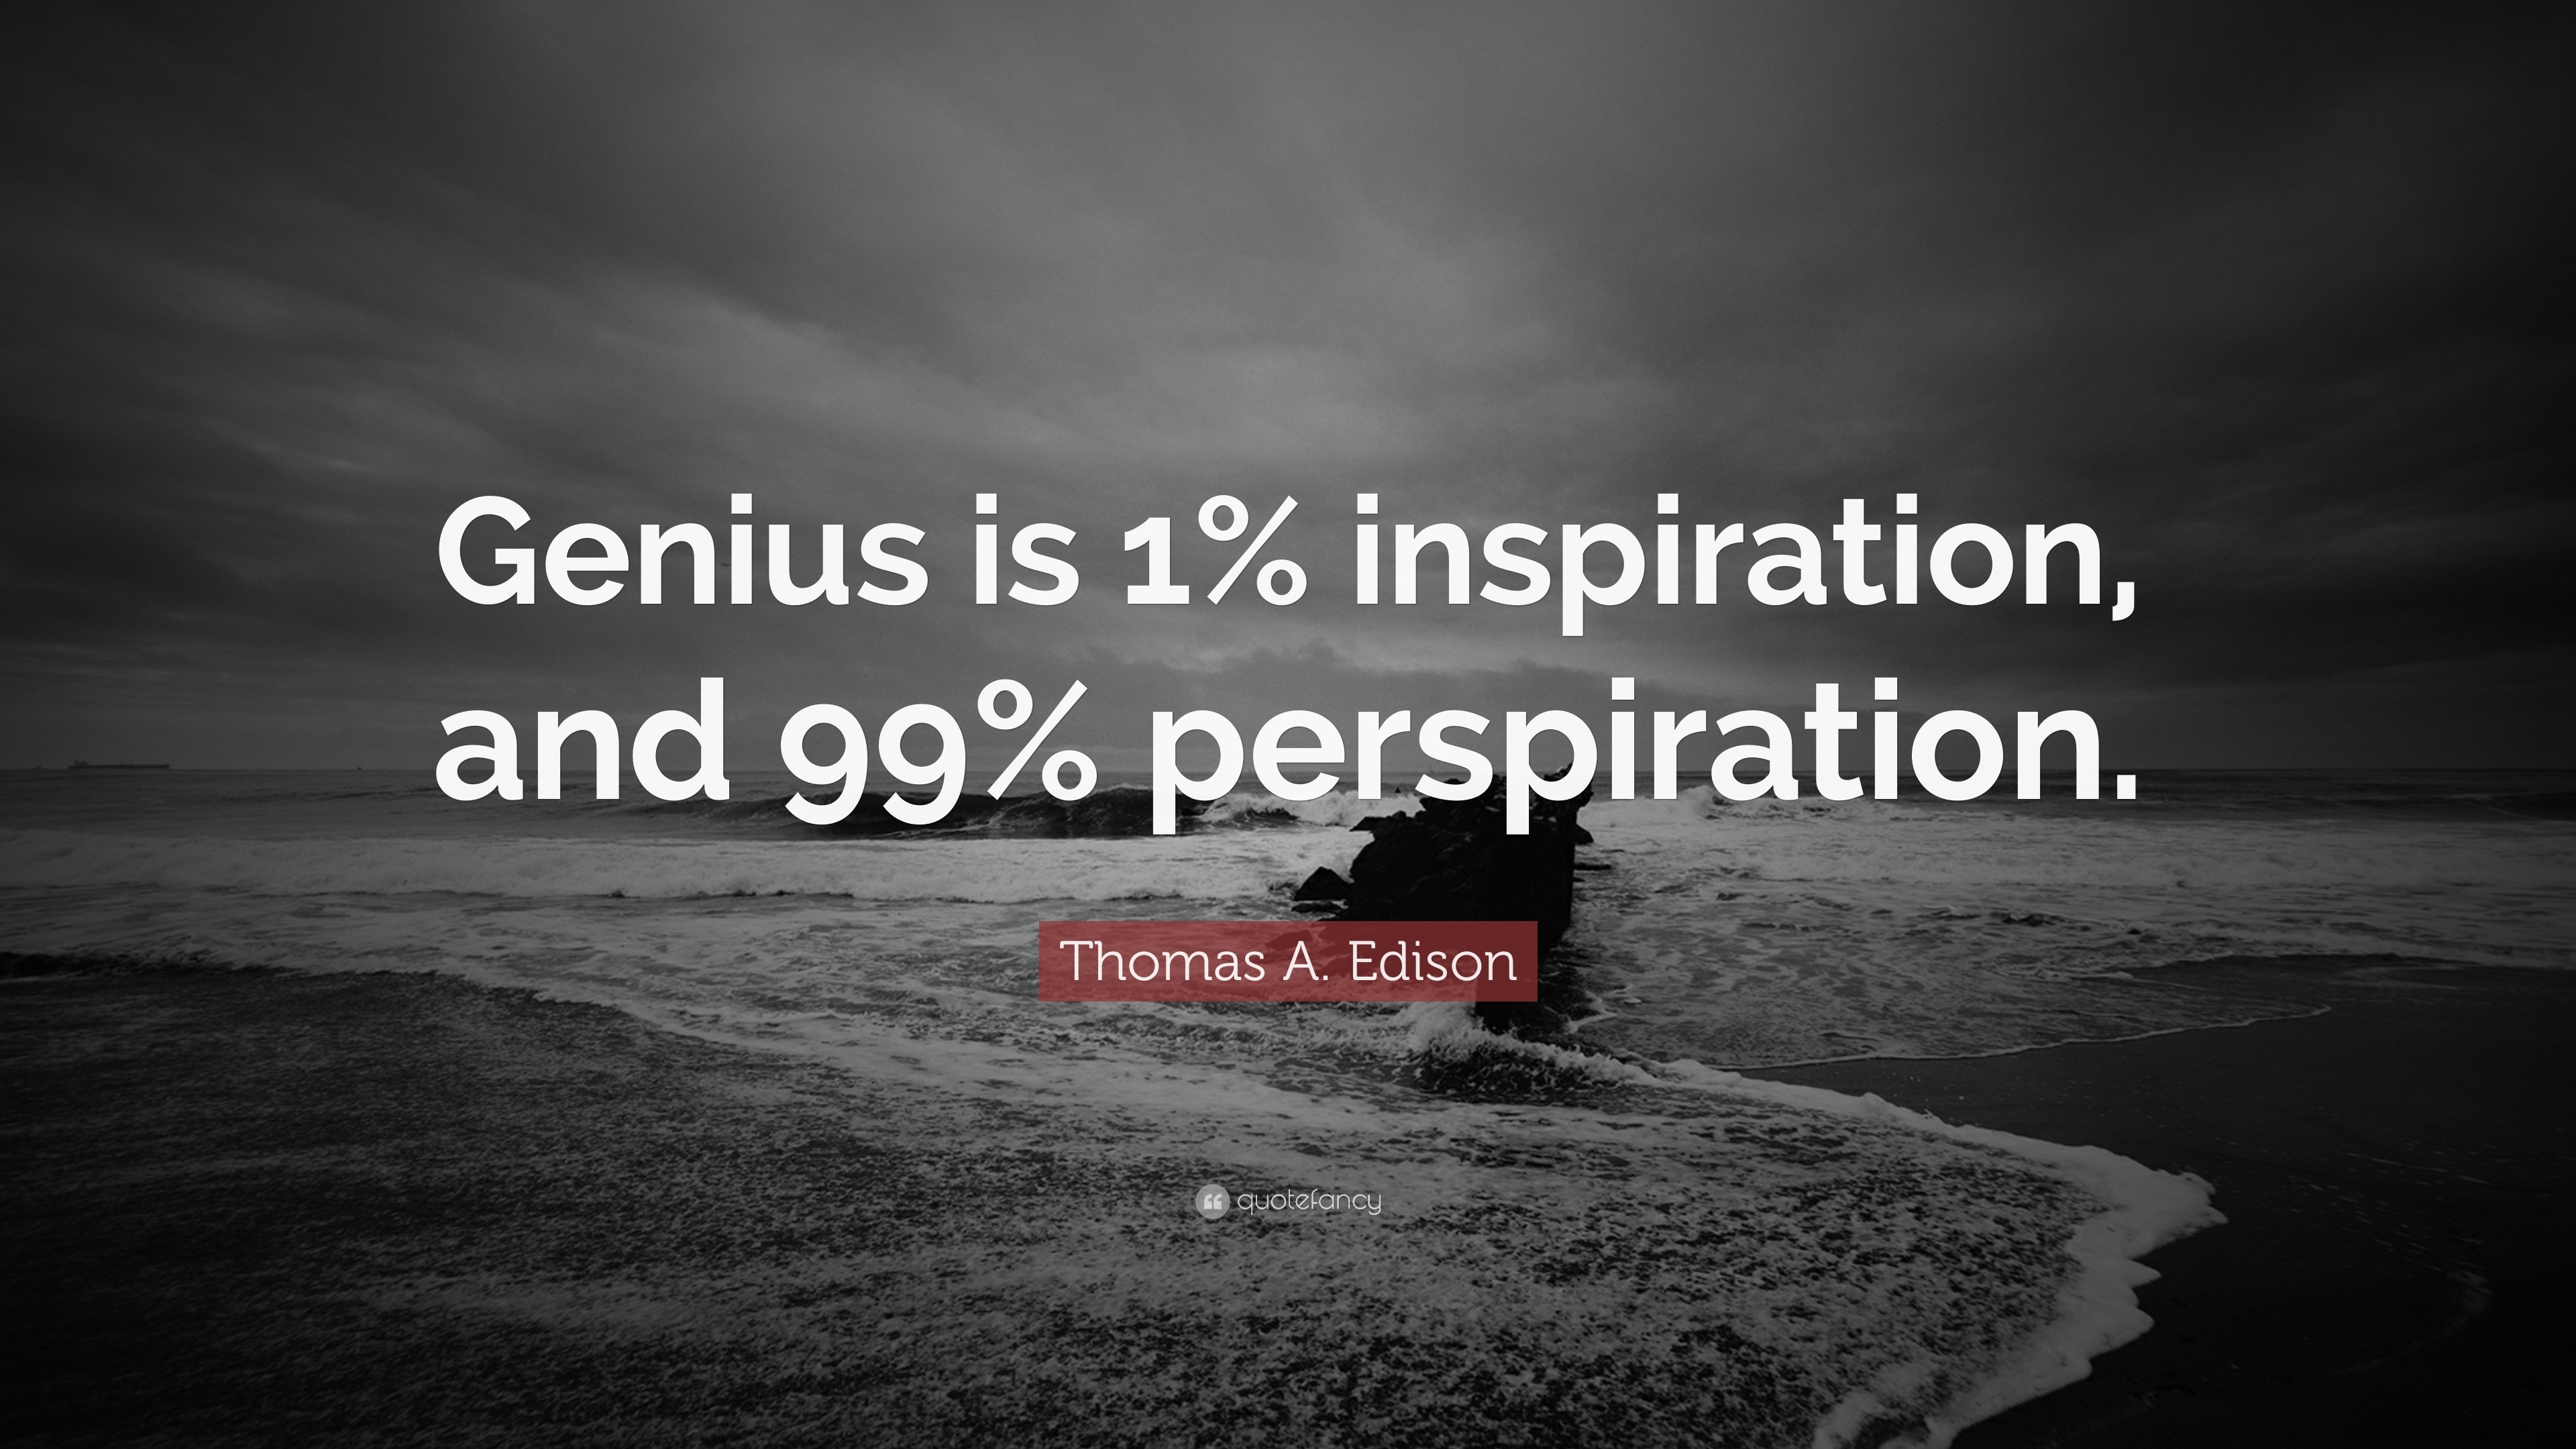 Thomas A. Edison Quote: “Genius is 1% inspiration, and 99% perspiration.”